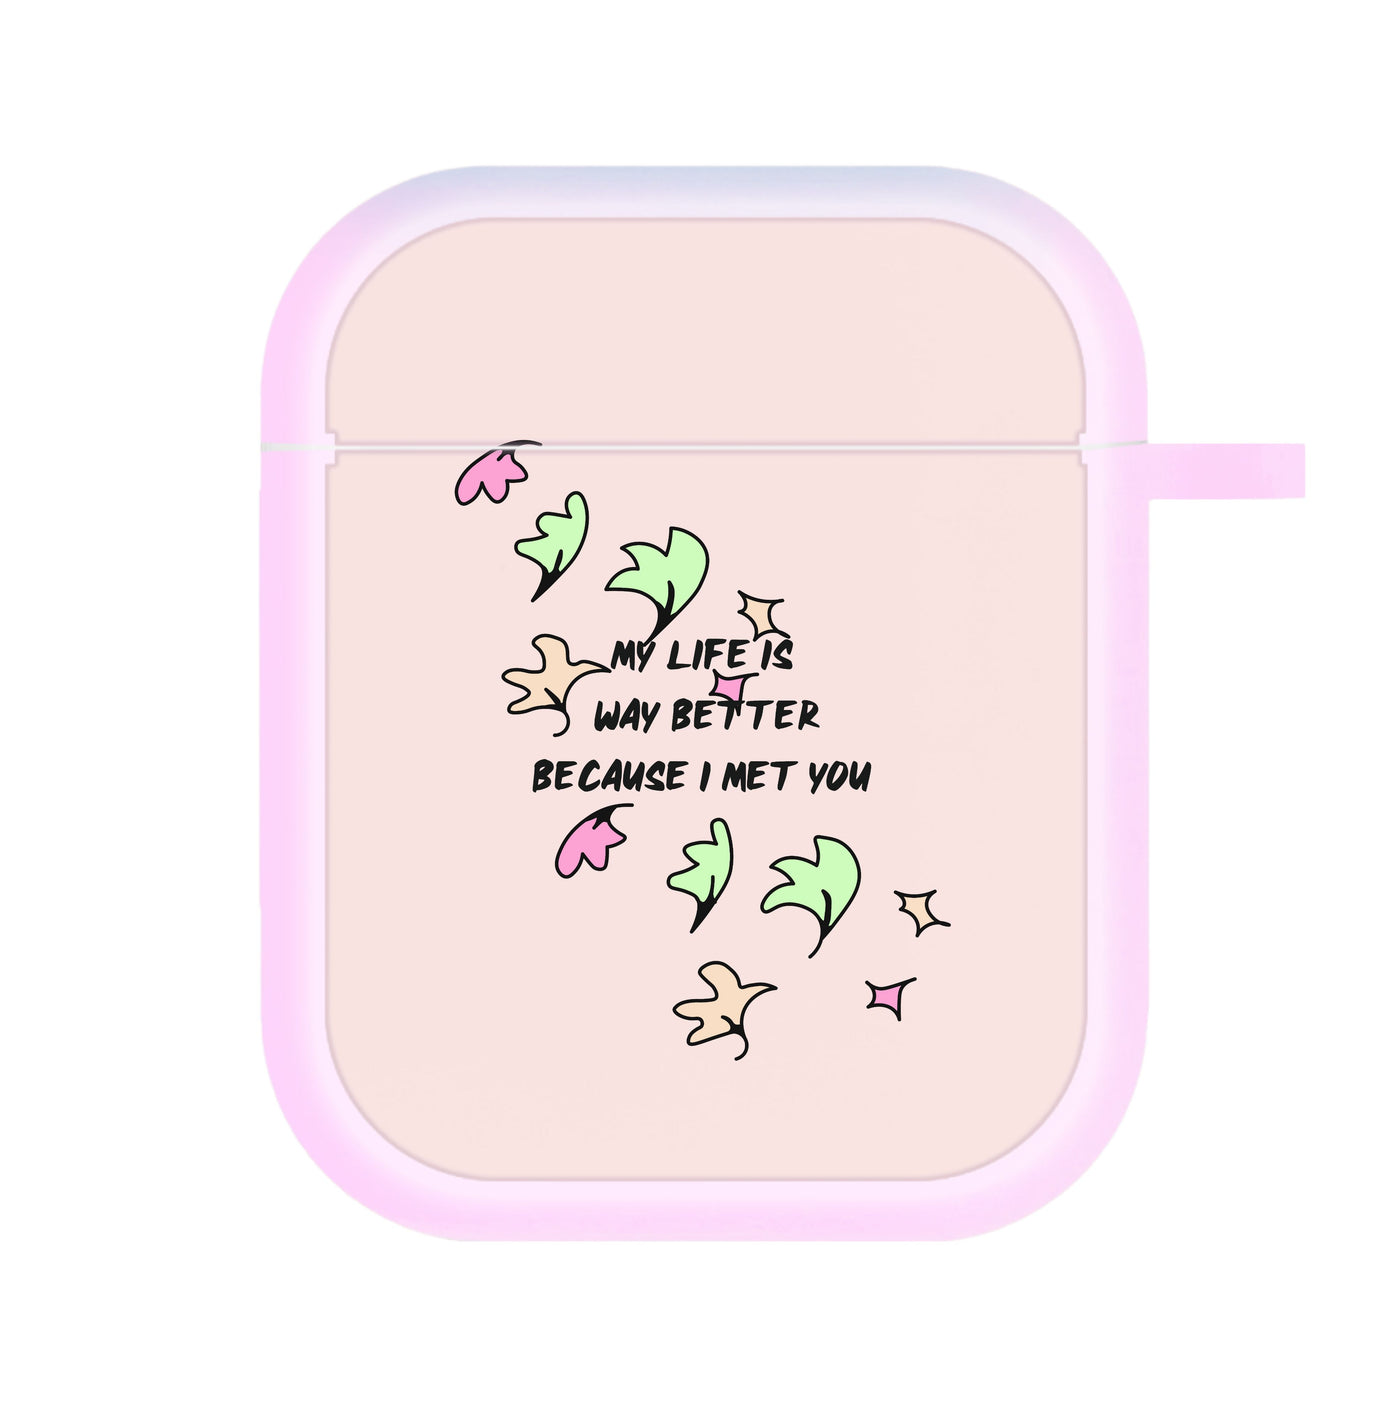 My Life Is Way Better Because I Met You - Heartstopper AirPods Case